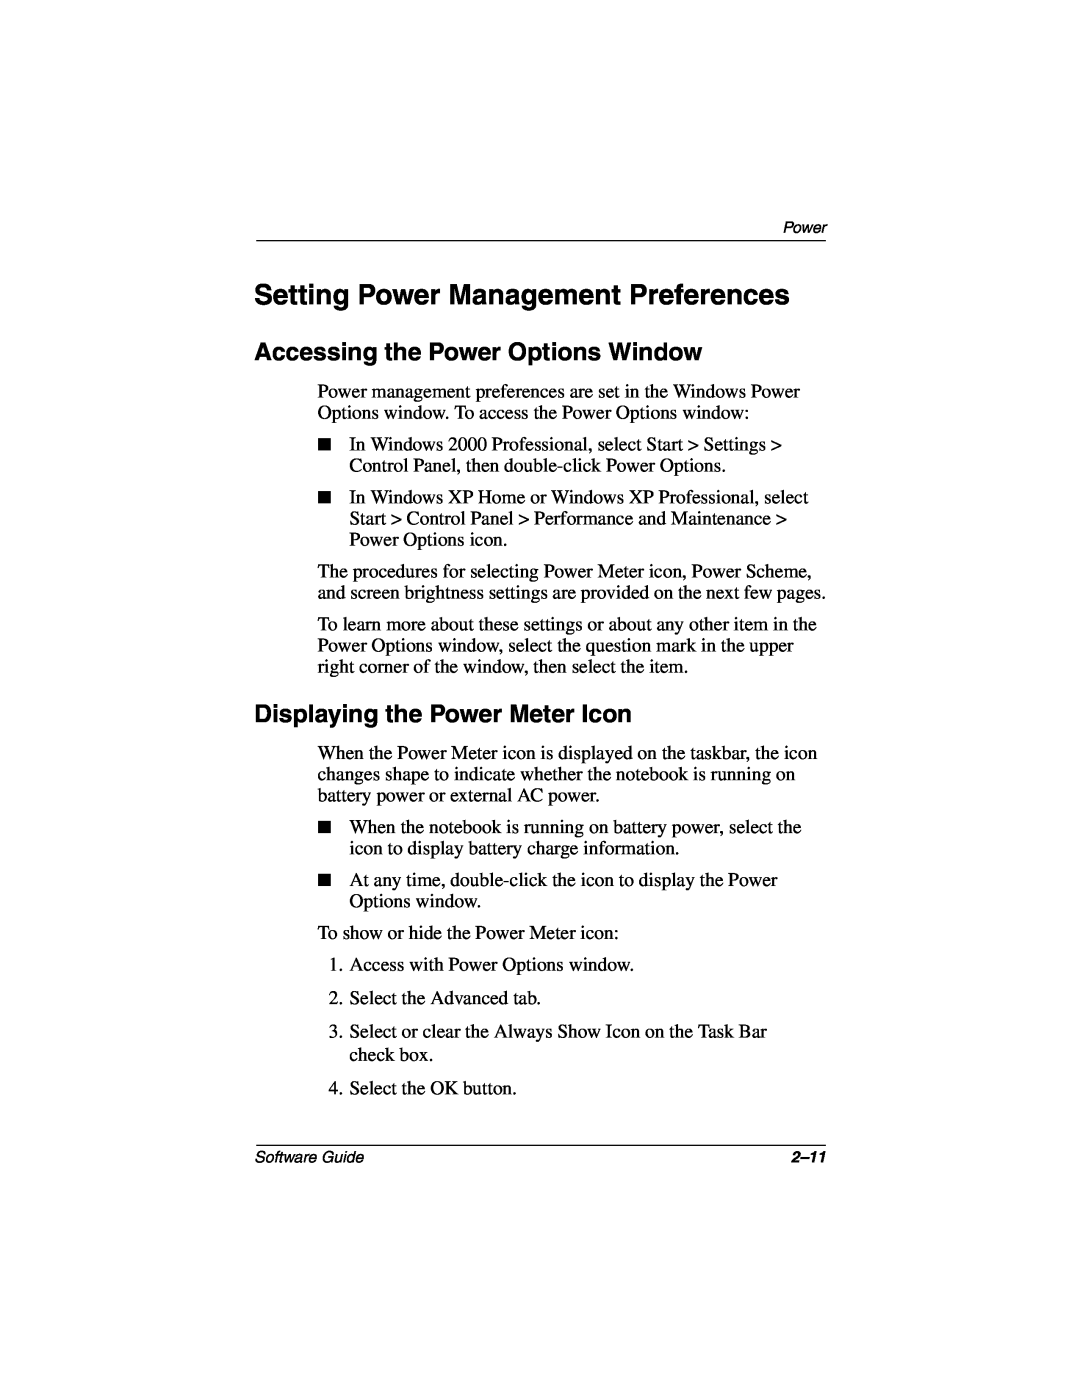 HP 2877AP manual Setting Power Management Preferences, Accessing the Power Options Window, Displaying the Power Meter Icon 